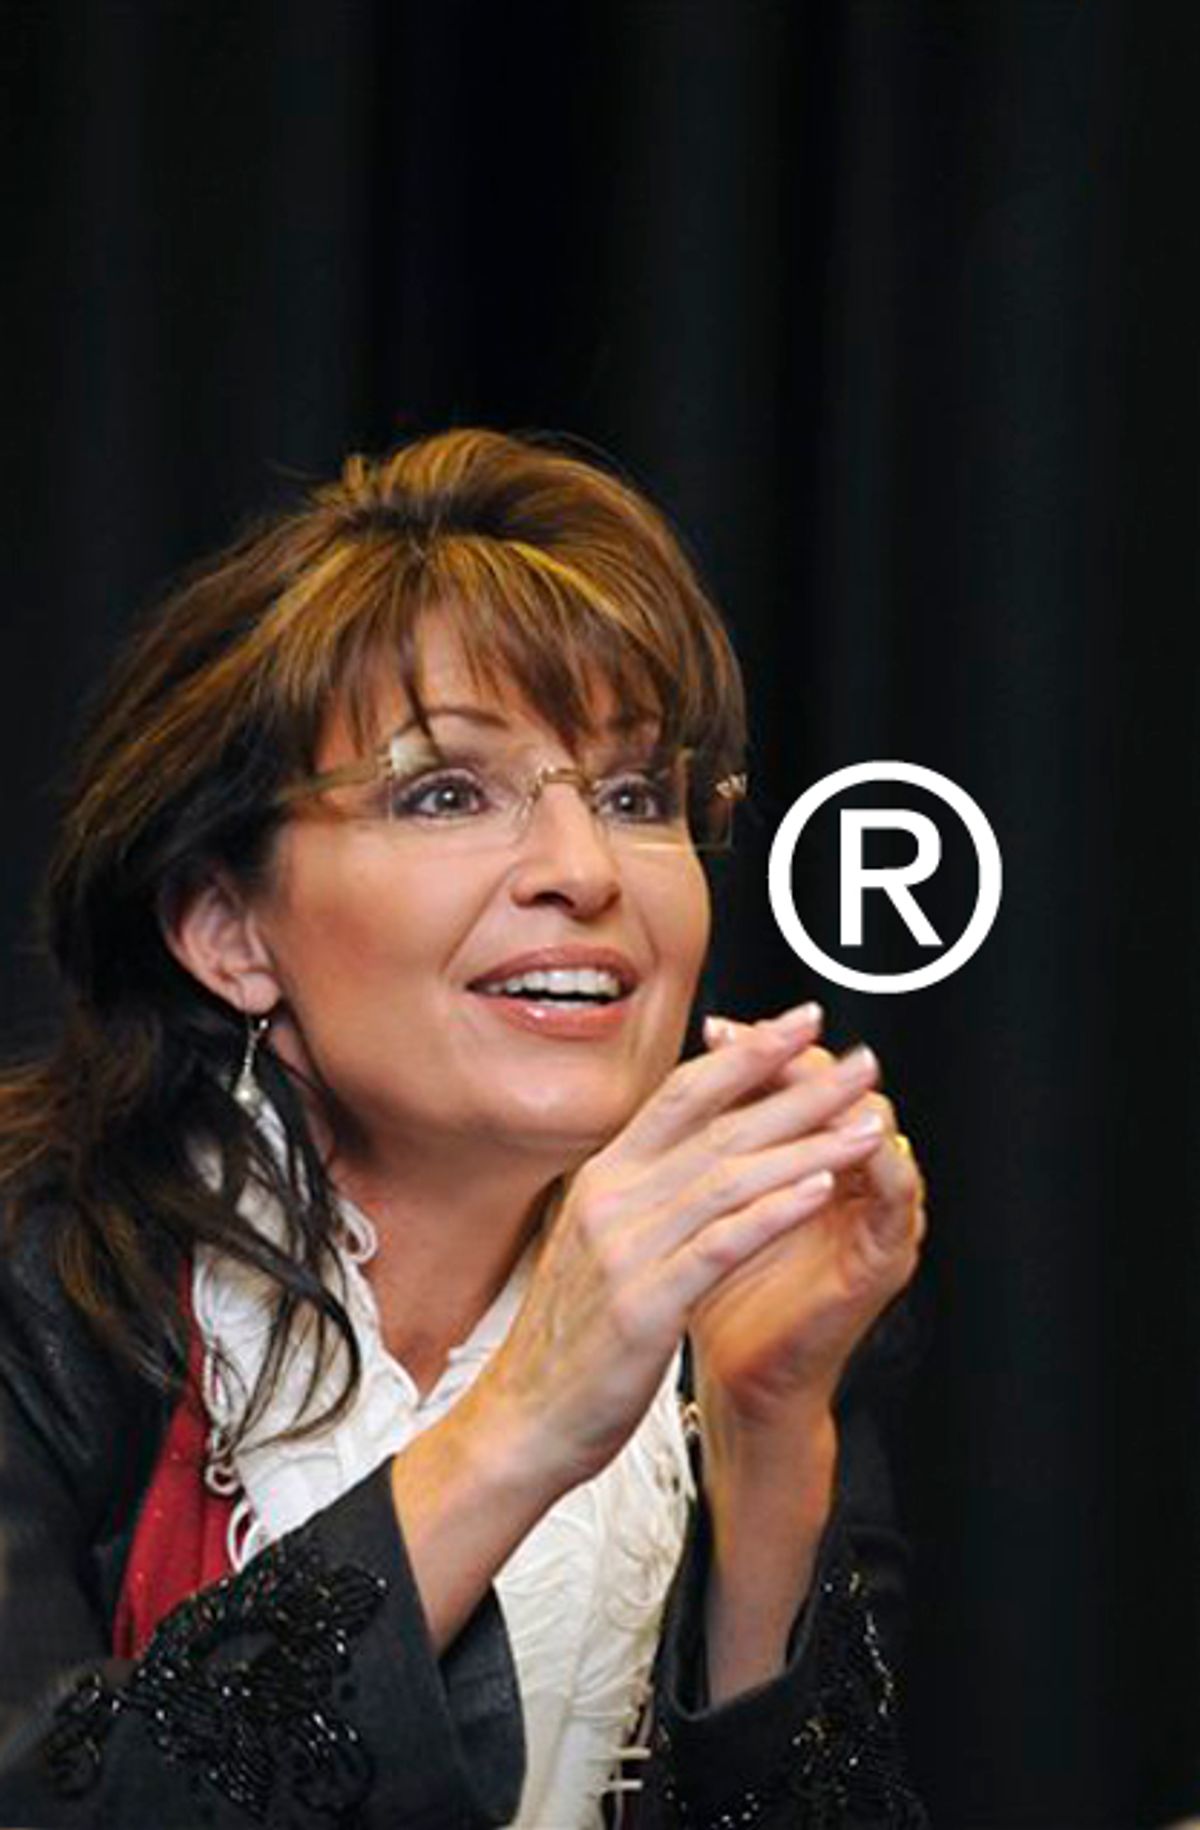 FILE - In this Dec. 3, 2010 file photo, former Alaska Gov. Sarah Palin talks during a book signing in Columbia, S.C.  This month's early under-the-radar campaigning by potential Republican challengers to President Barack Obama is a reminder of something too easily forgotten: Running for president is harder than it looks, and Obama ultimately will stand against a flesh-and-blood nominee certain to make mistakes along the way. (AP Photo/Virginia Postic, File) (Virginia Postic)